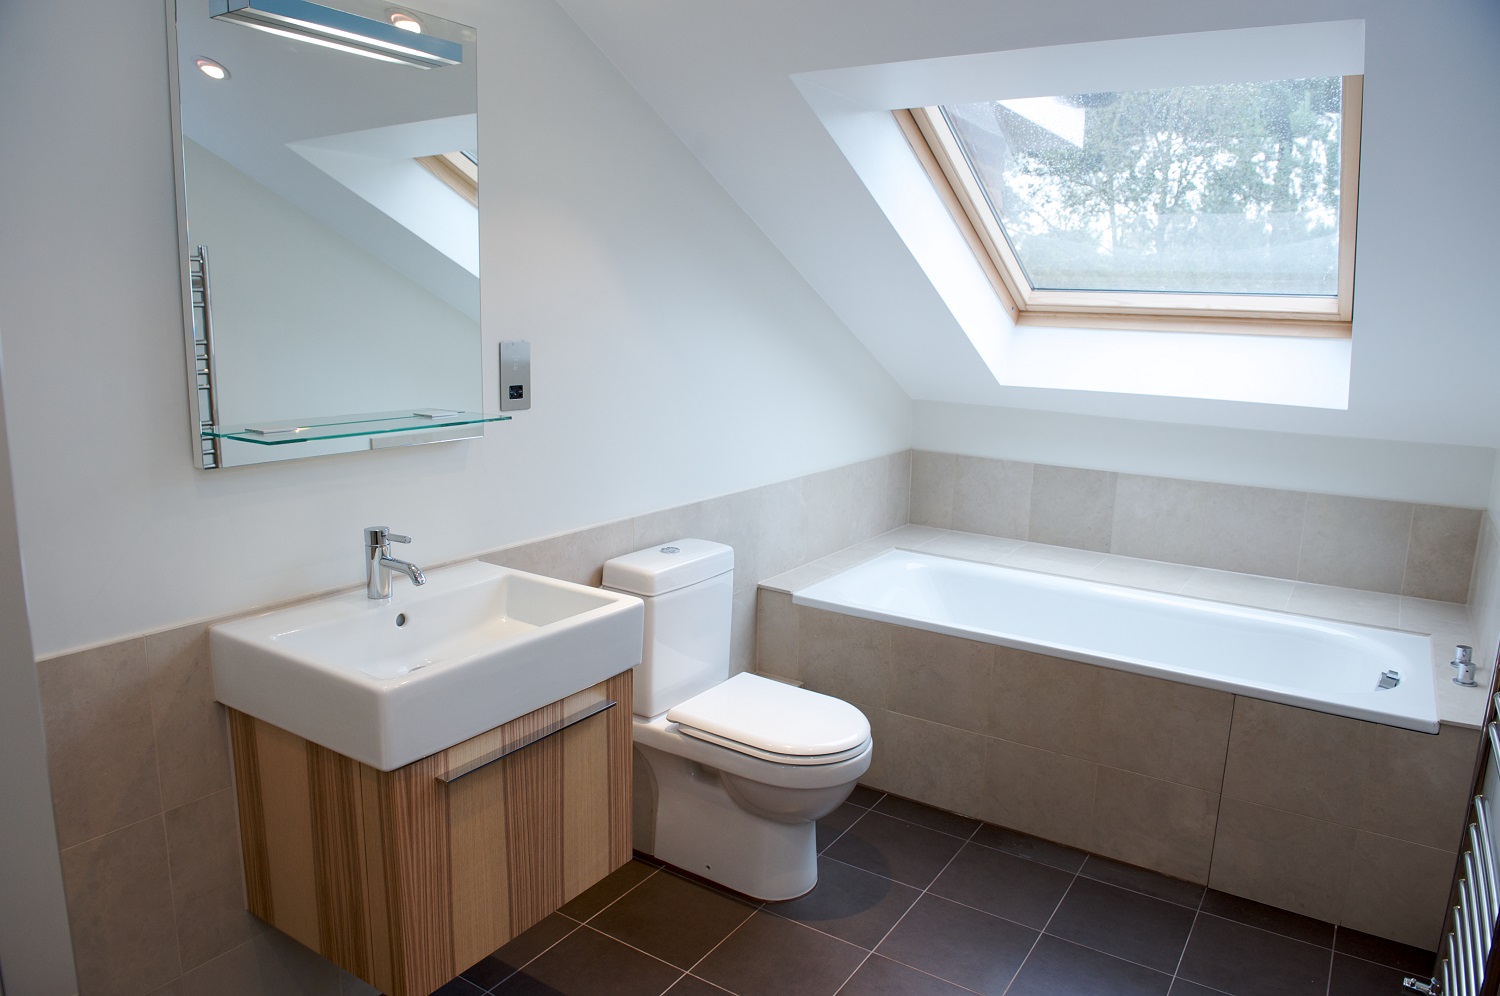 Lifestyle image of a small attic bathroom with tiled floor and walls, a built in bath below a skylight, a close coupled toilet, a wall hung wooden washbasin unit and a mirror with integrated shelf